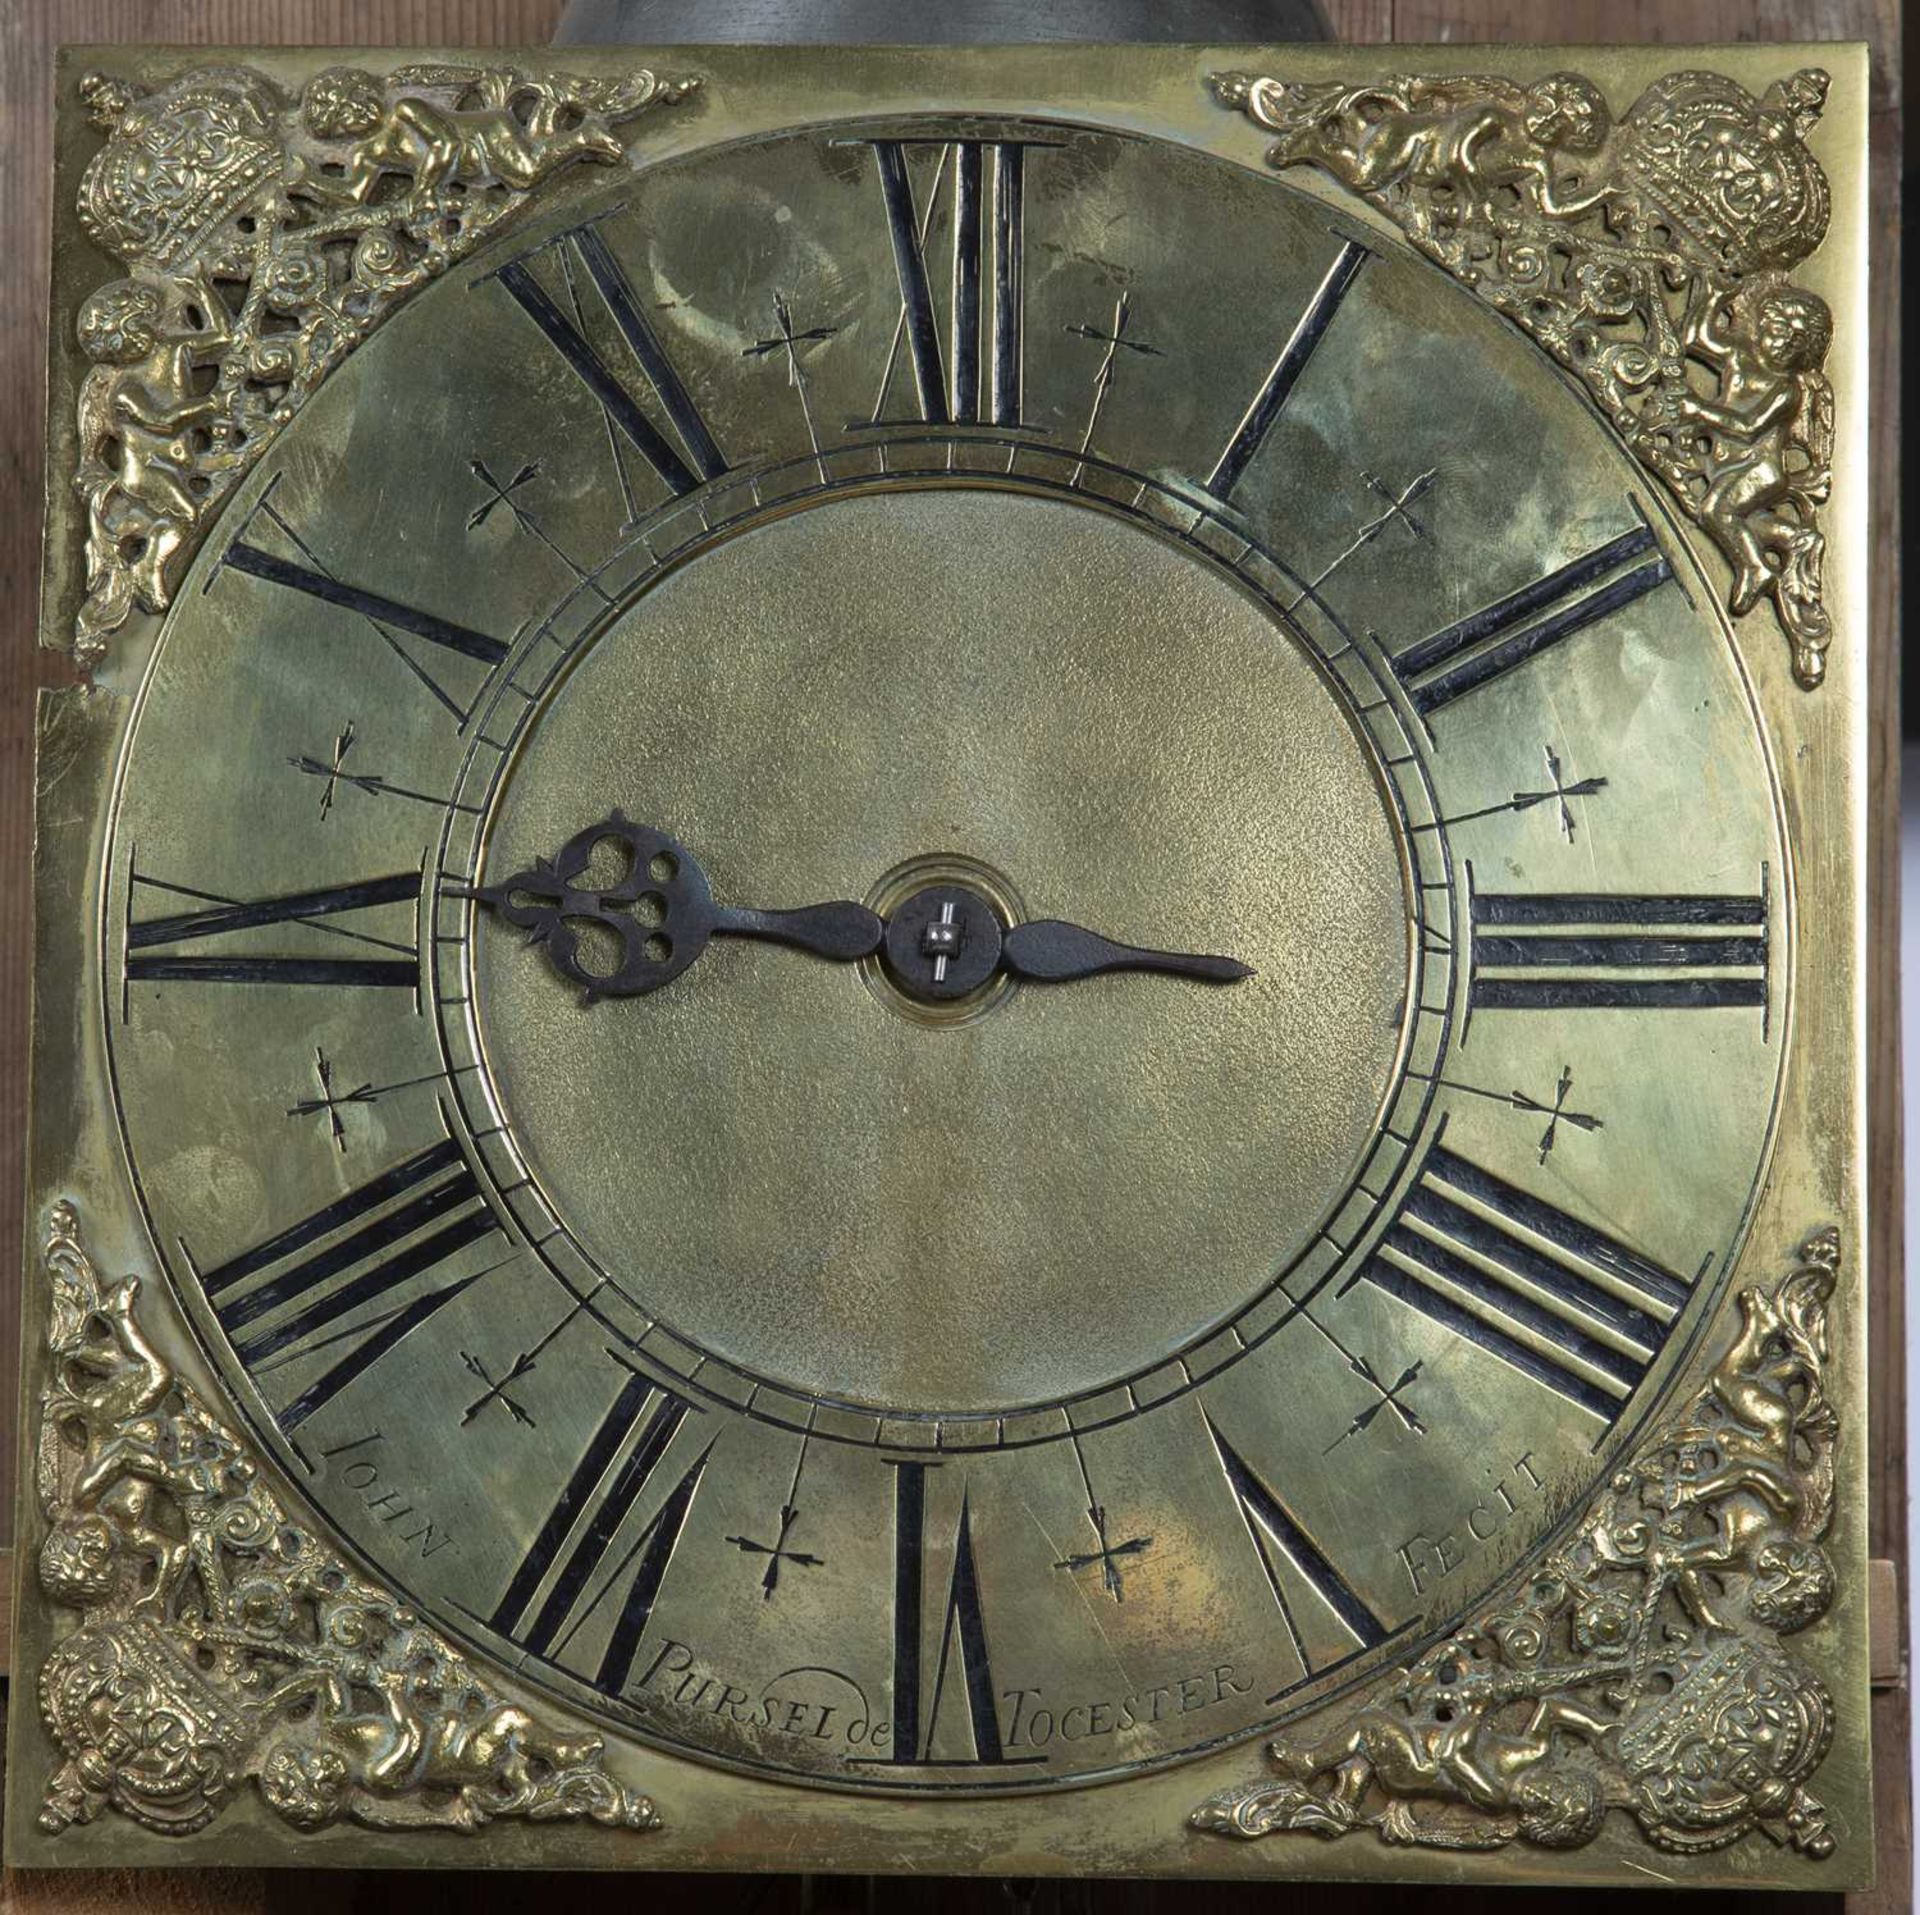 John Pursell of Towcester, pitch pine cased longcase clock the 11 inch square brass dial having - Image 4 of 4